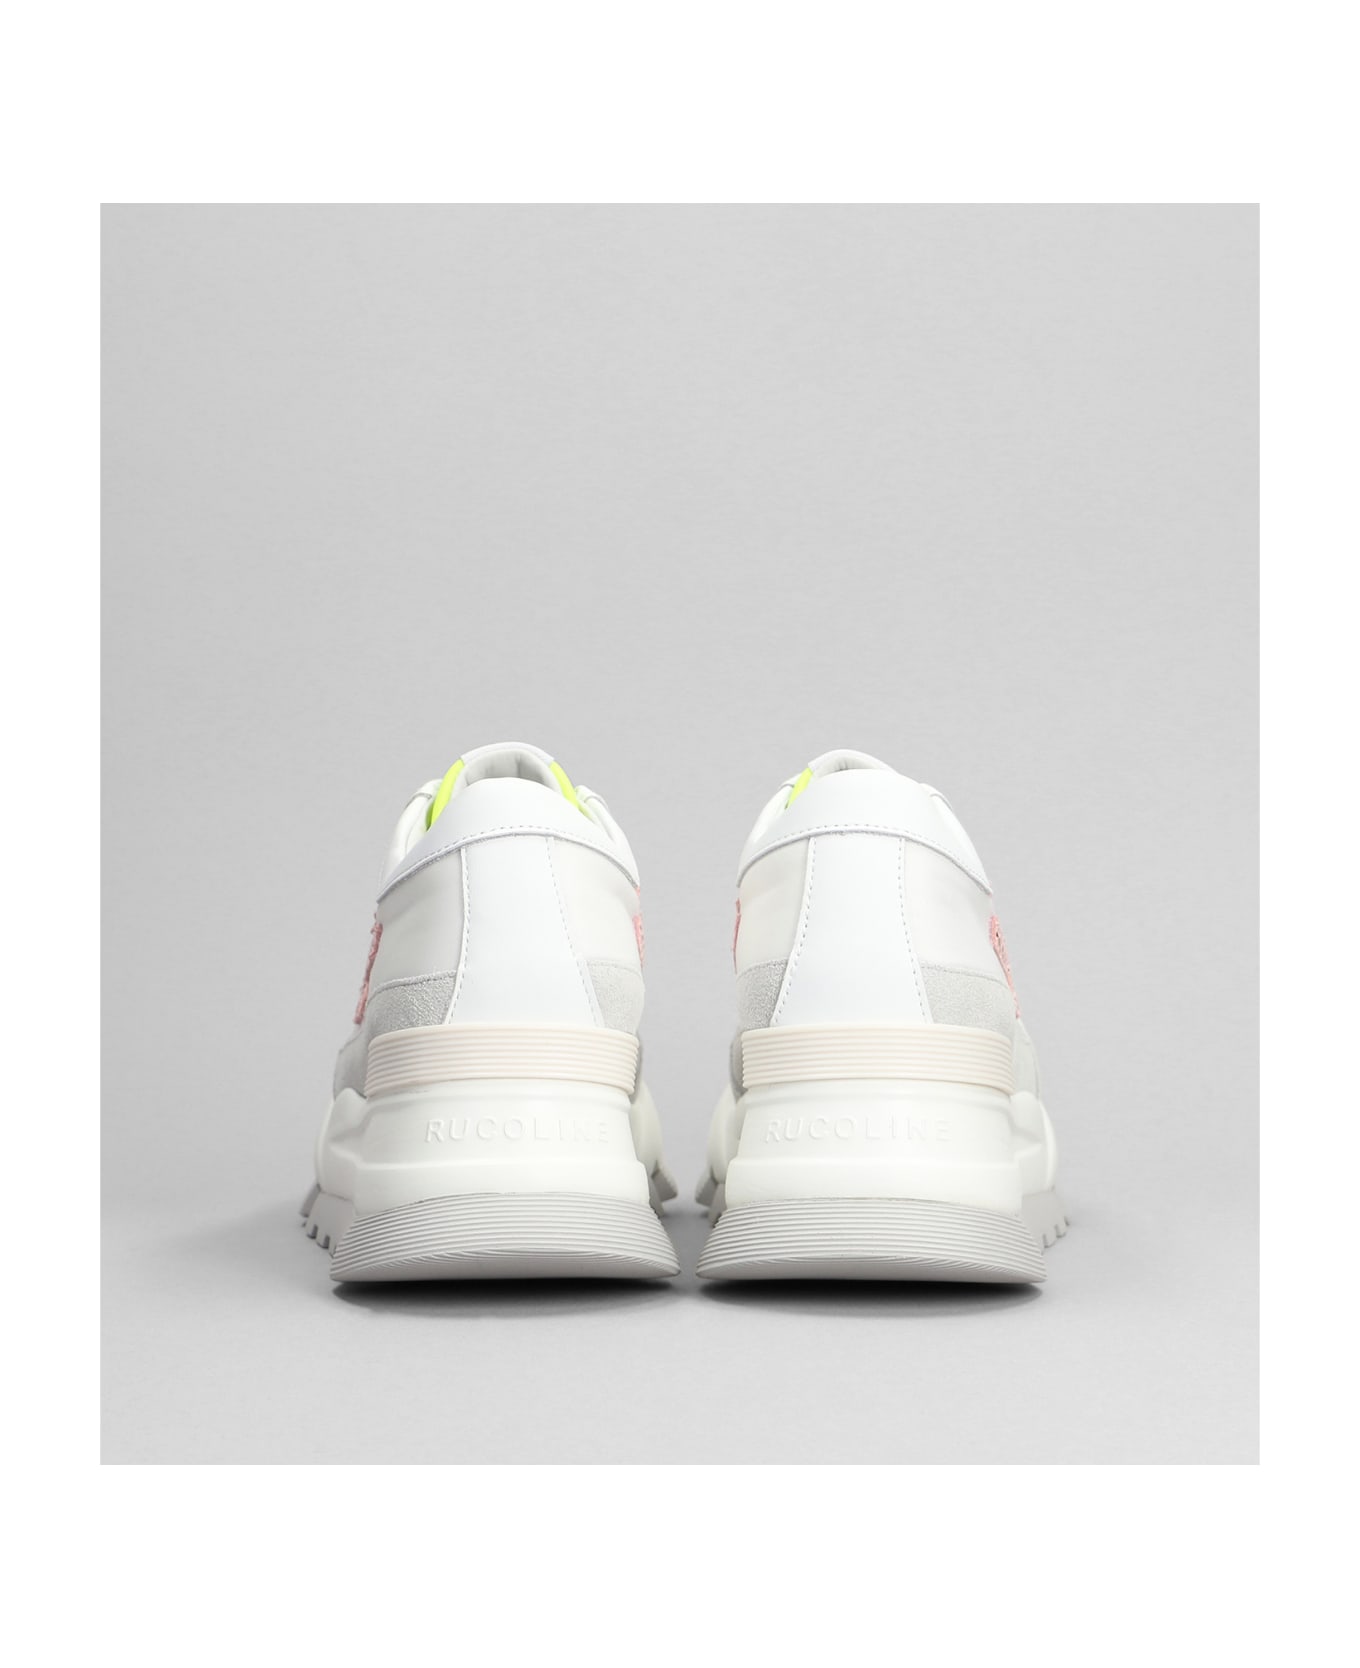 Ruco Line Aki Sneakers In White Suede And Fabric - white スニーカー